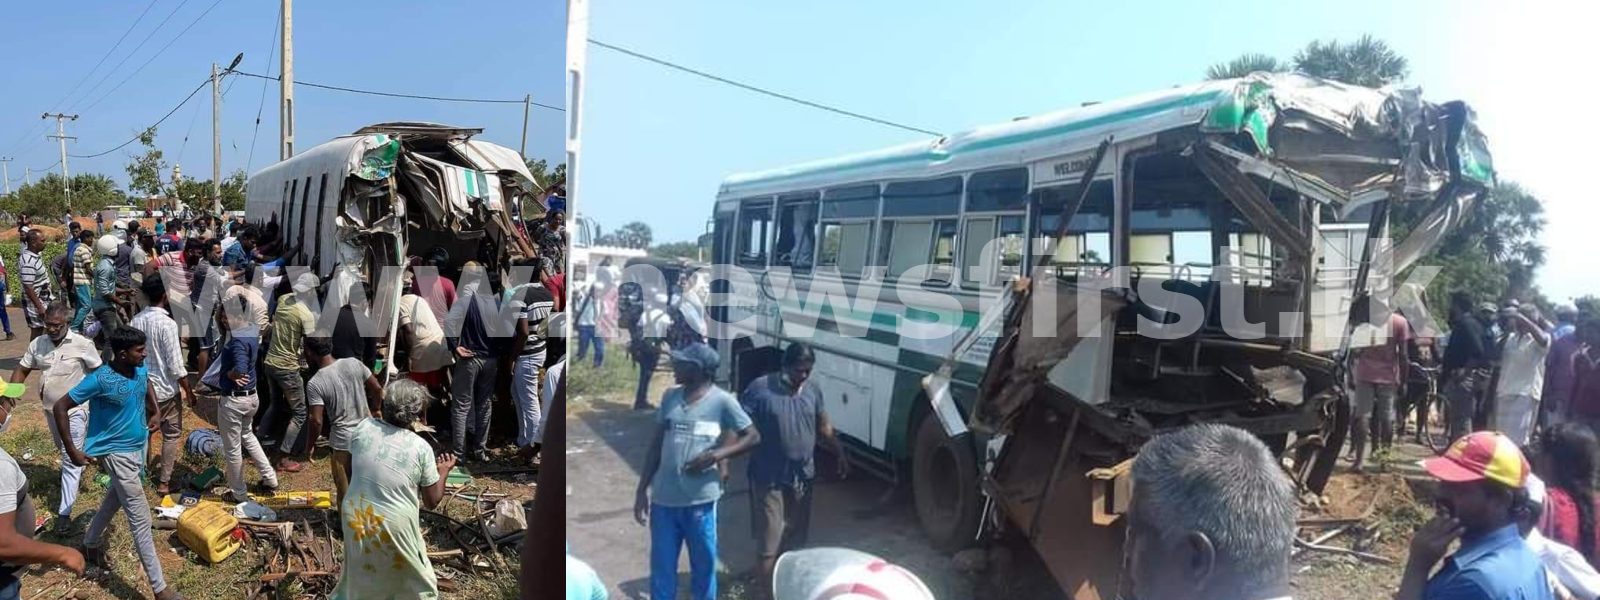 (PICTURES) 10 injured following collision between train and bus